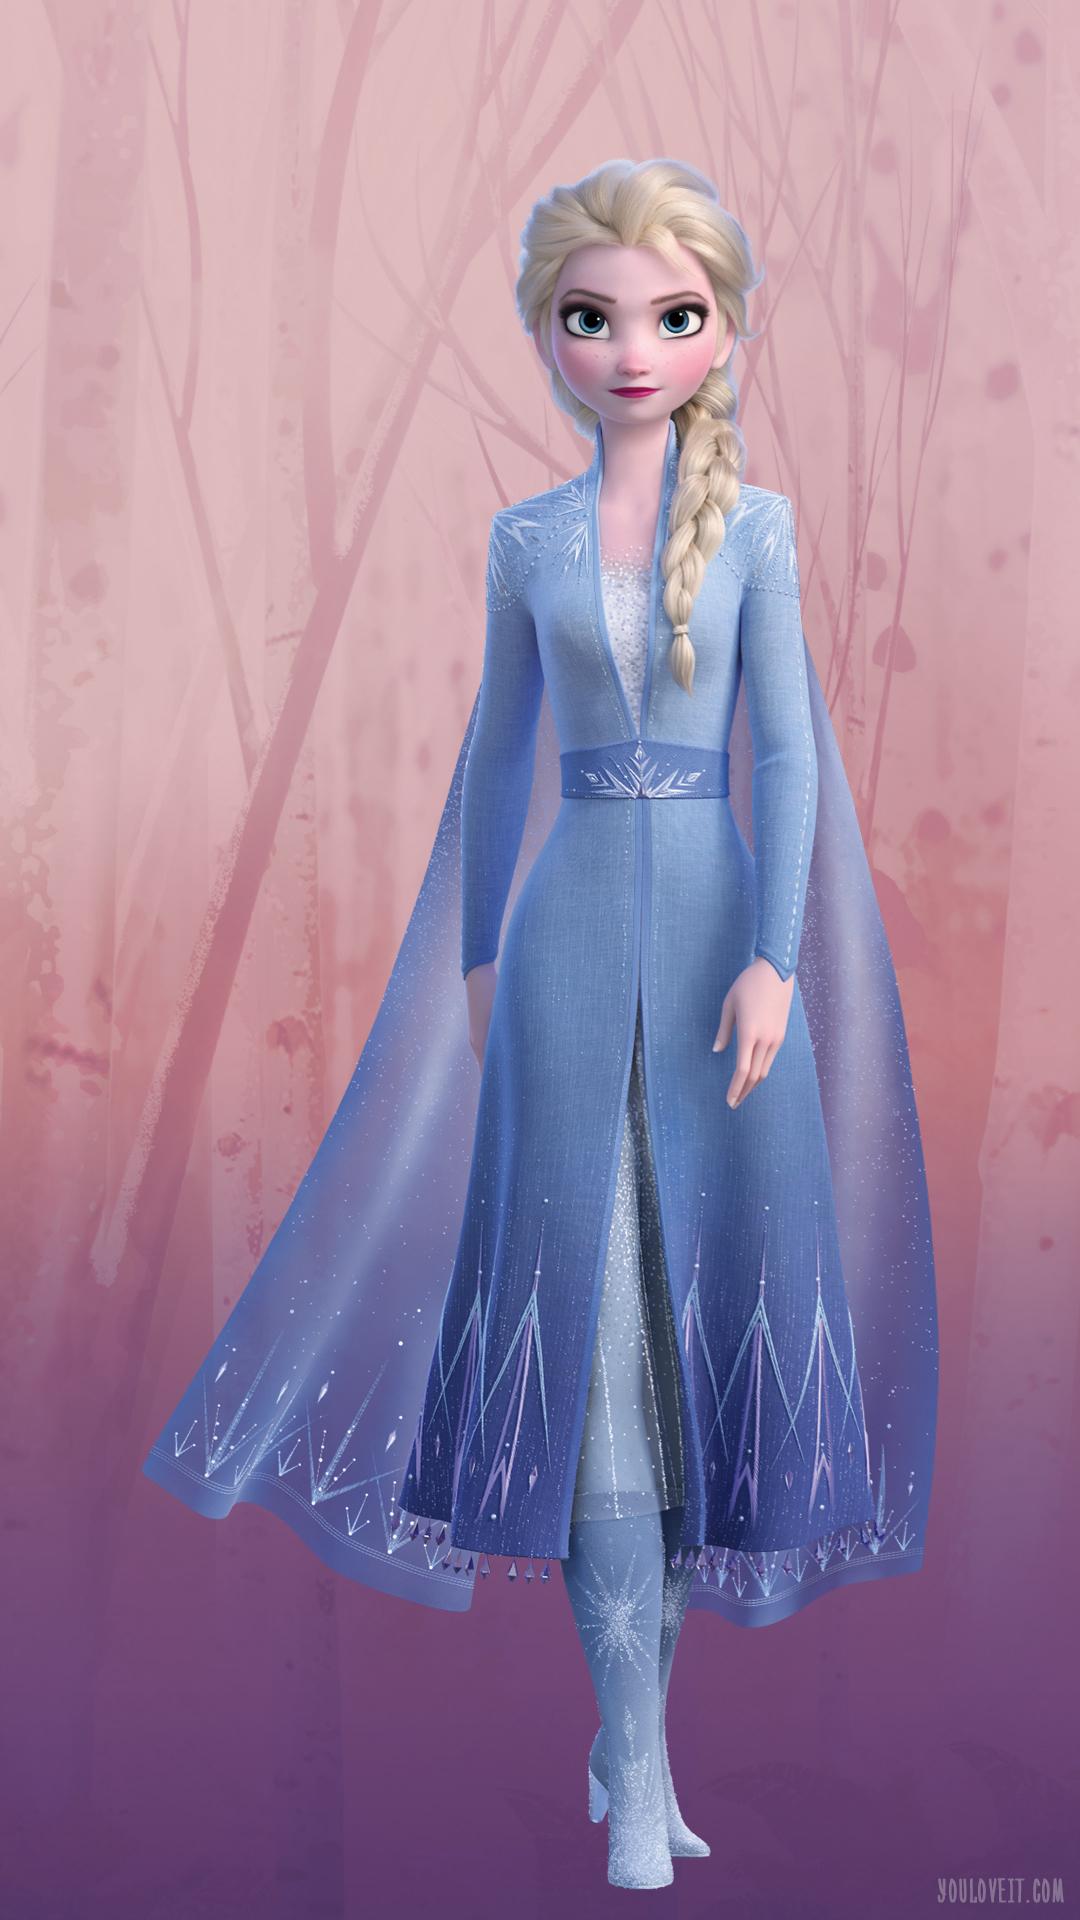 Frozen 2 Phone Wallpaper and Anna Photo